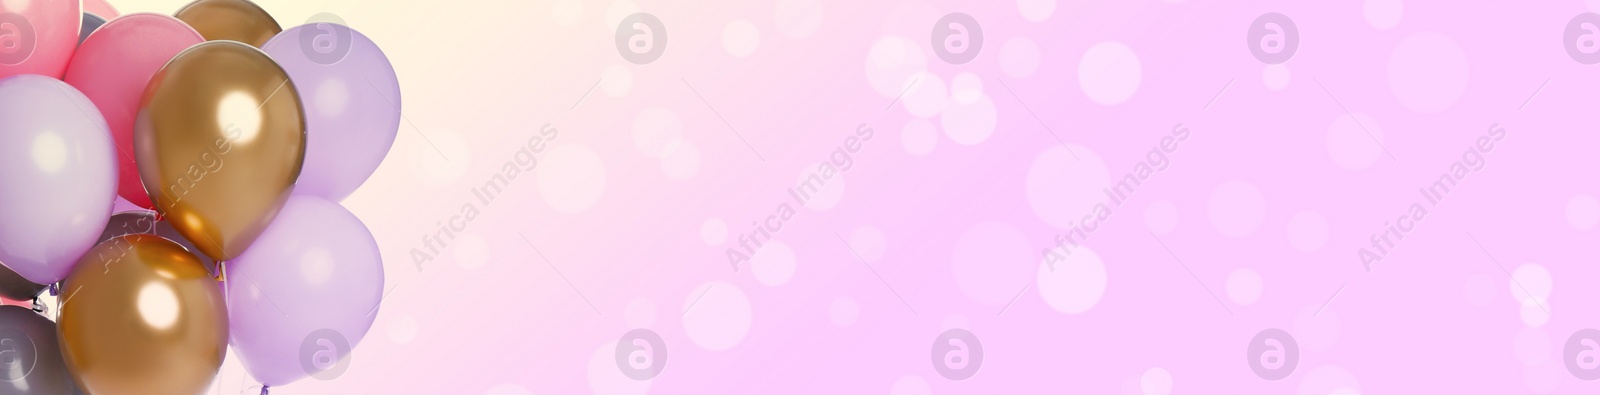 Image of Bright balloons on color background with bokeh effect, space for text. Banner design